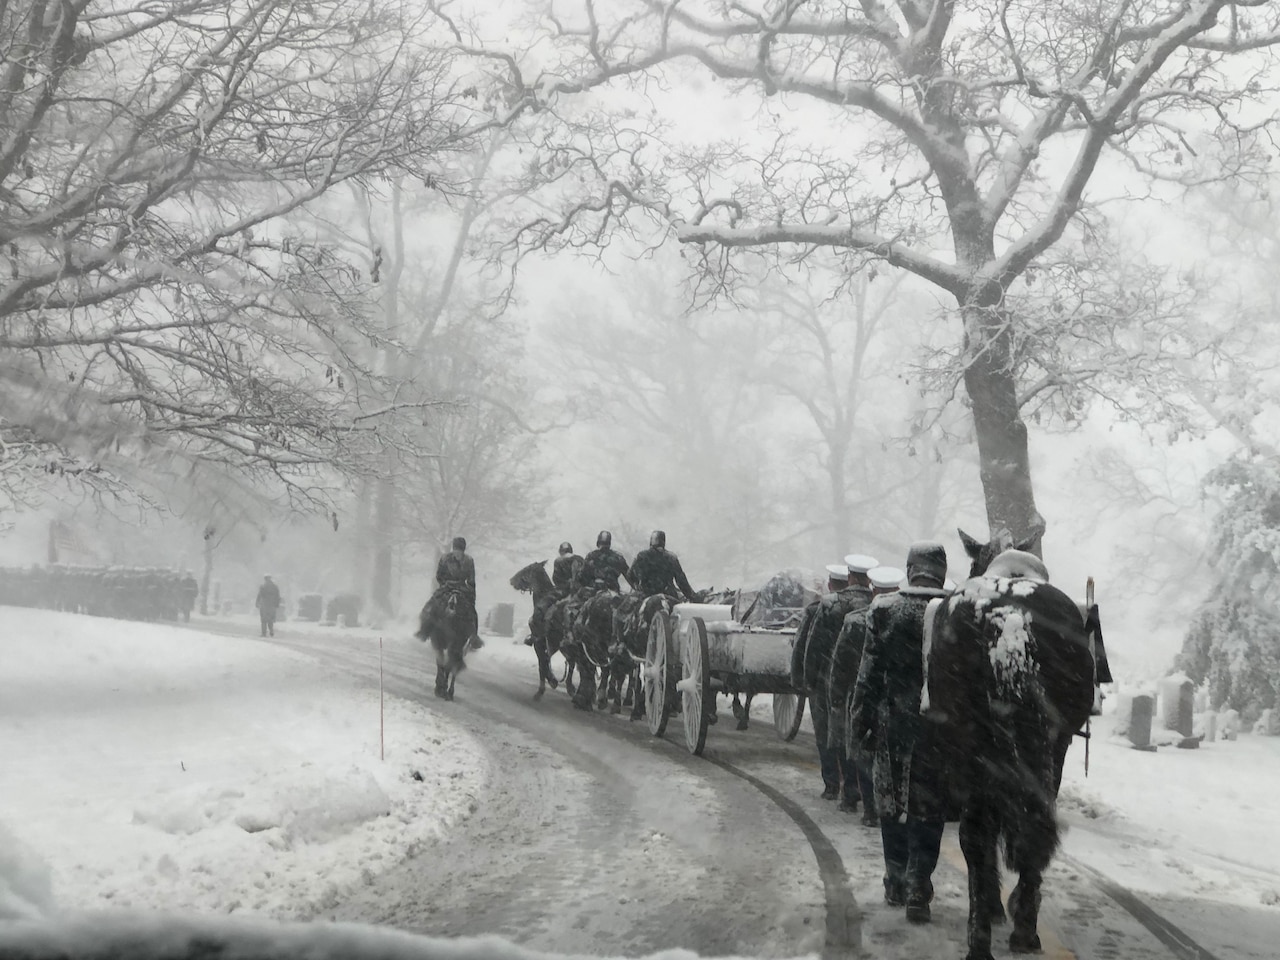 Marines travel through snow, some on horseback and others walking behind a carriage.